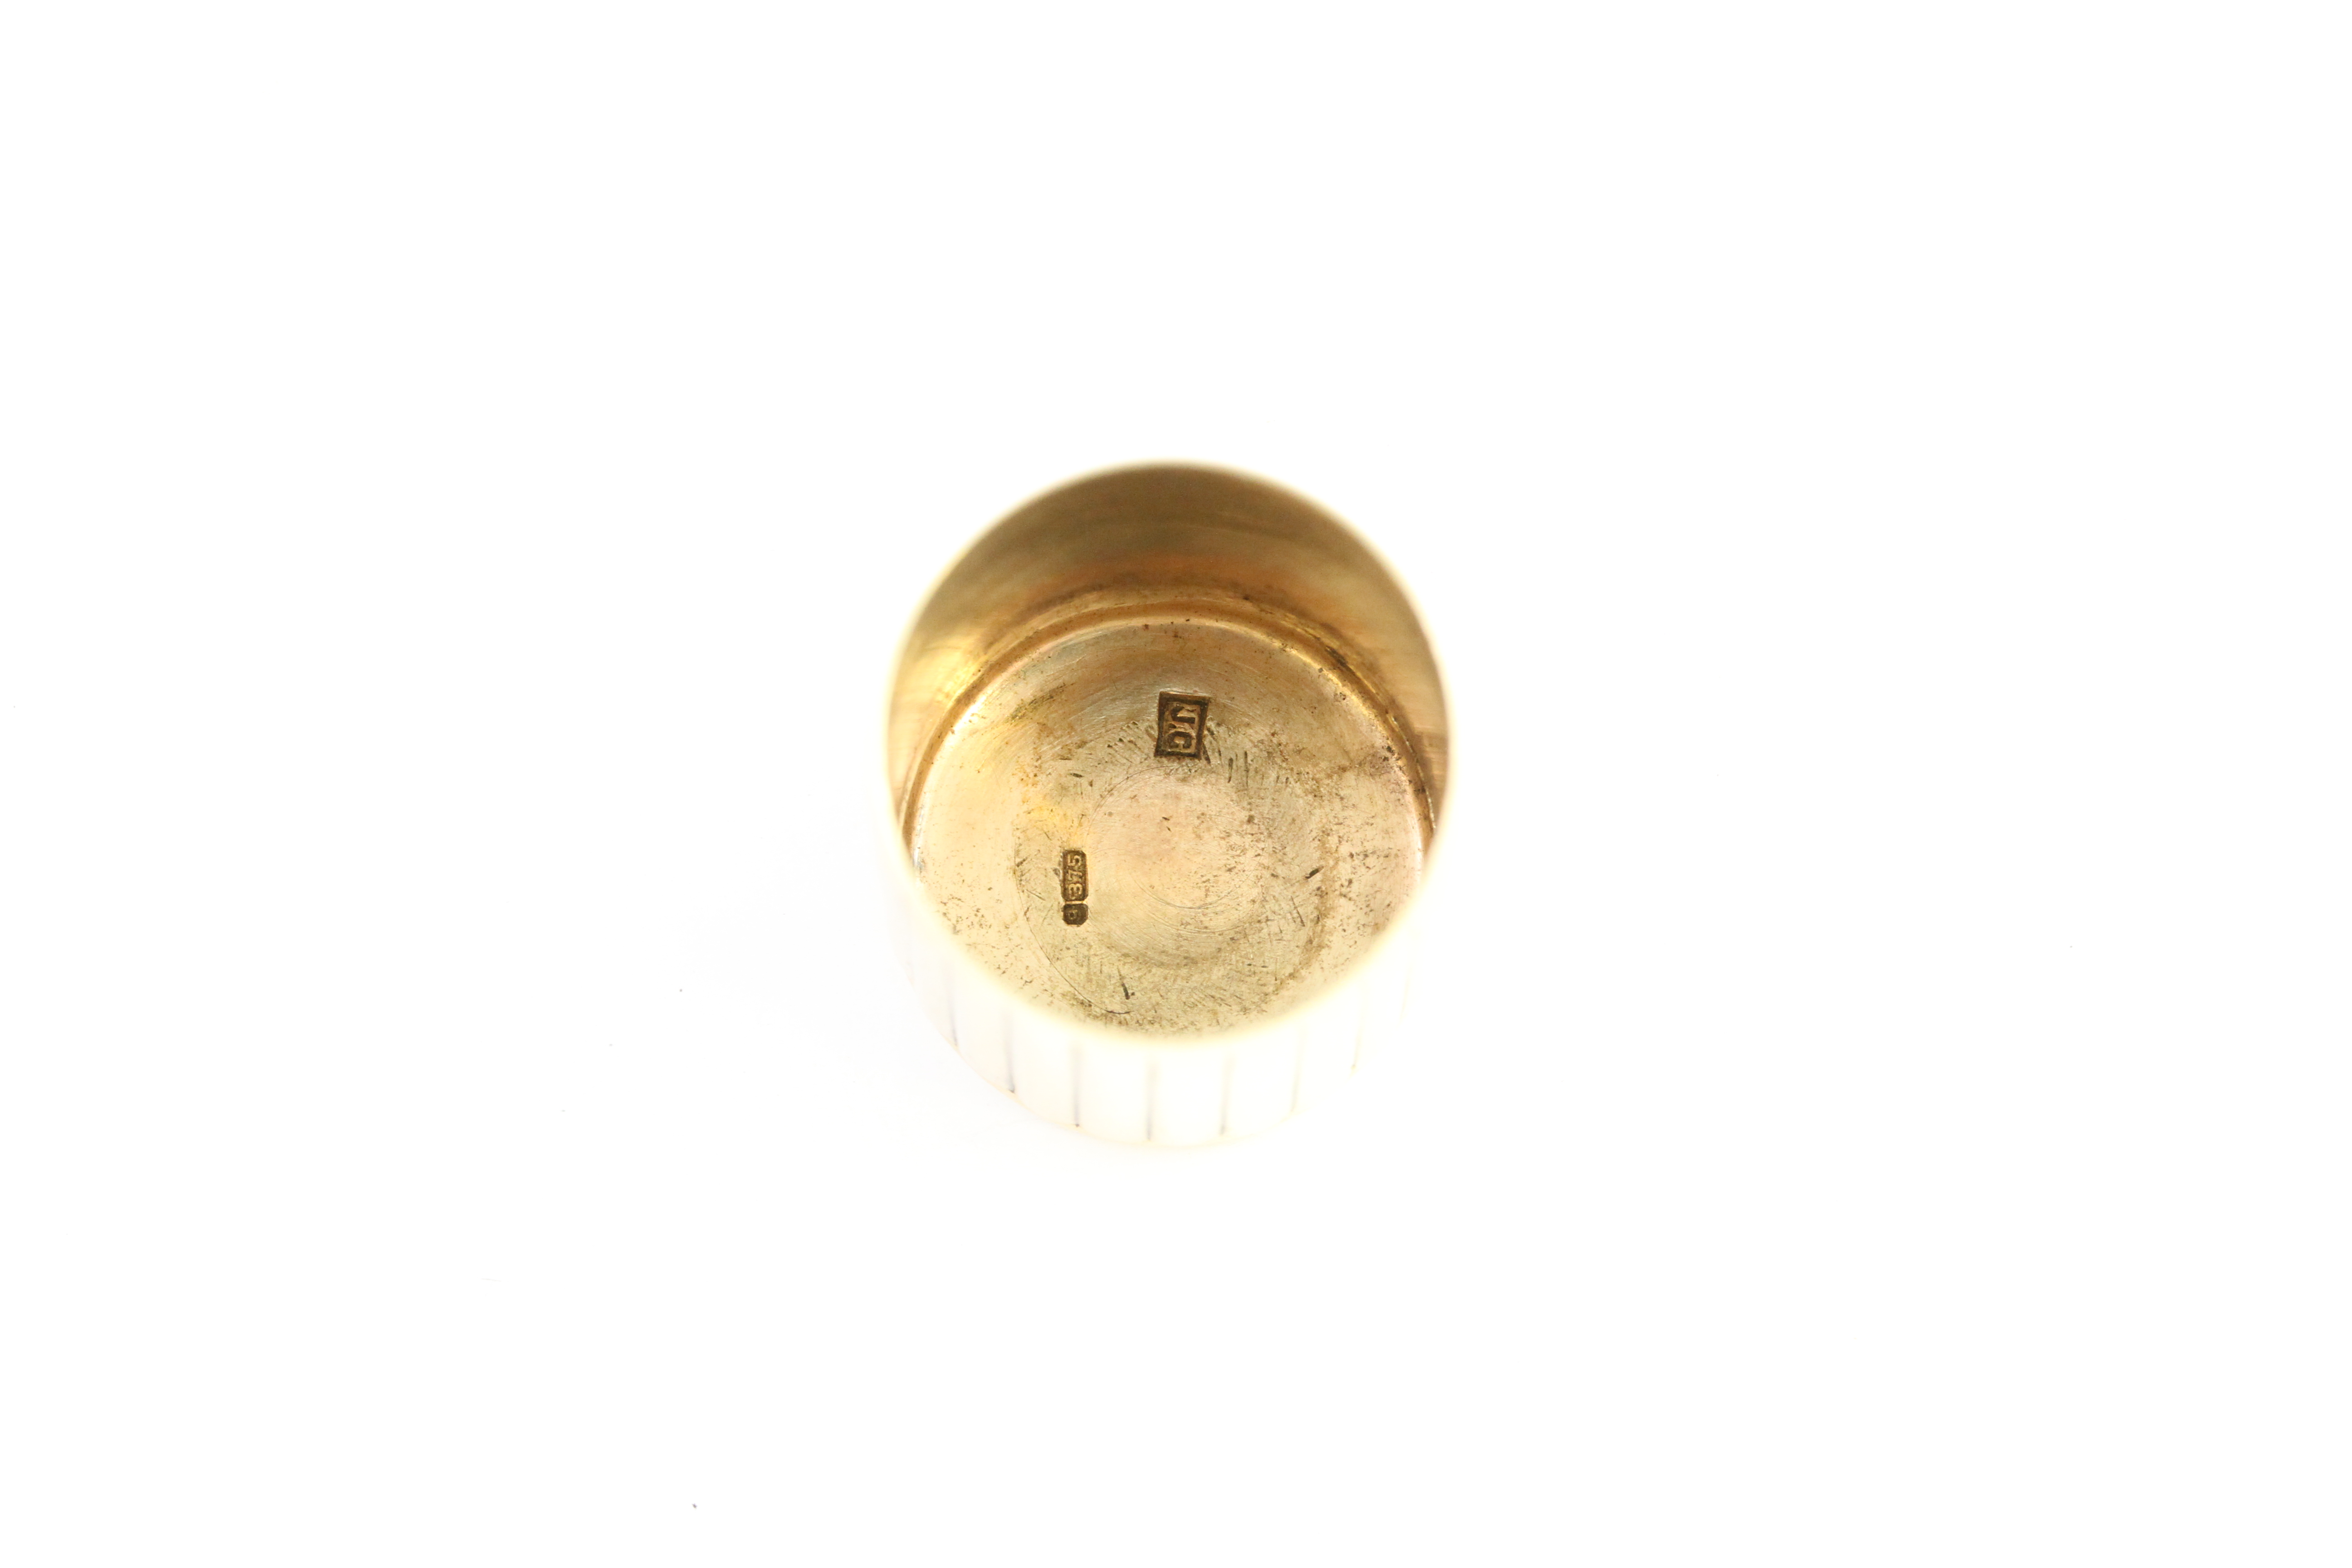 Rare 9ct Cartier London 1940's 'Tom Thumb' Lighter (With 'JC' London Mark), 4 x 1.5cm - Image 3 of 4